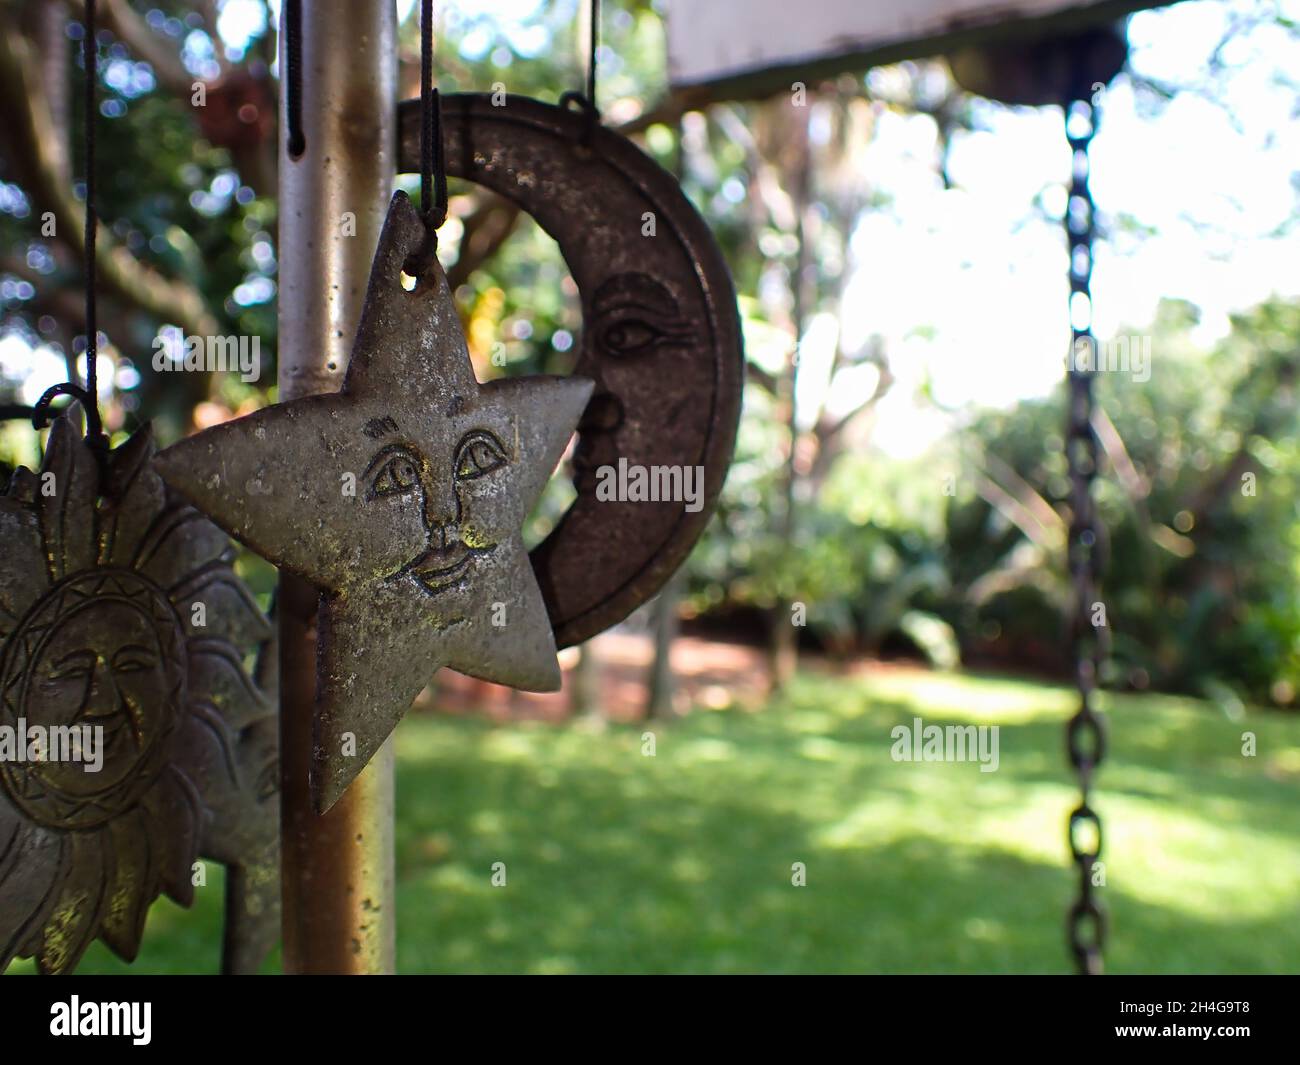 Celestial Wind Chime Close-up In Home Garden Stock Photo